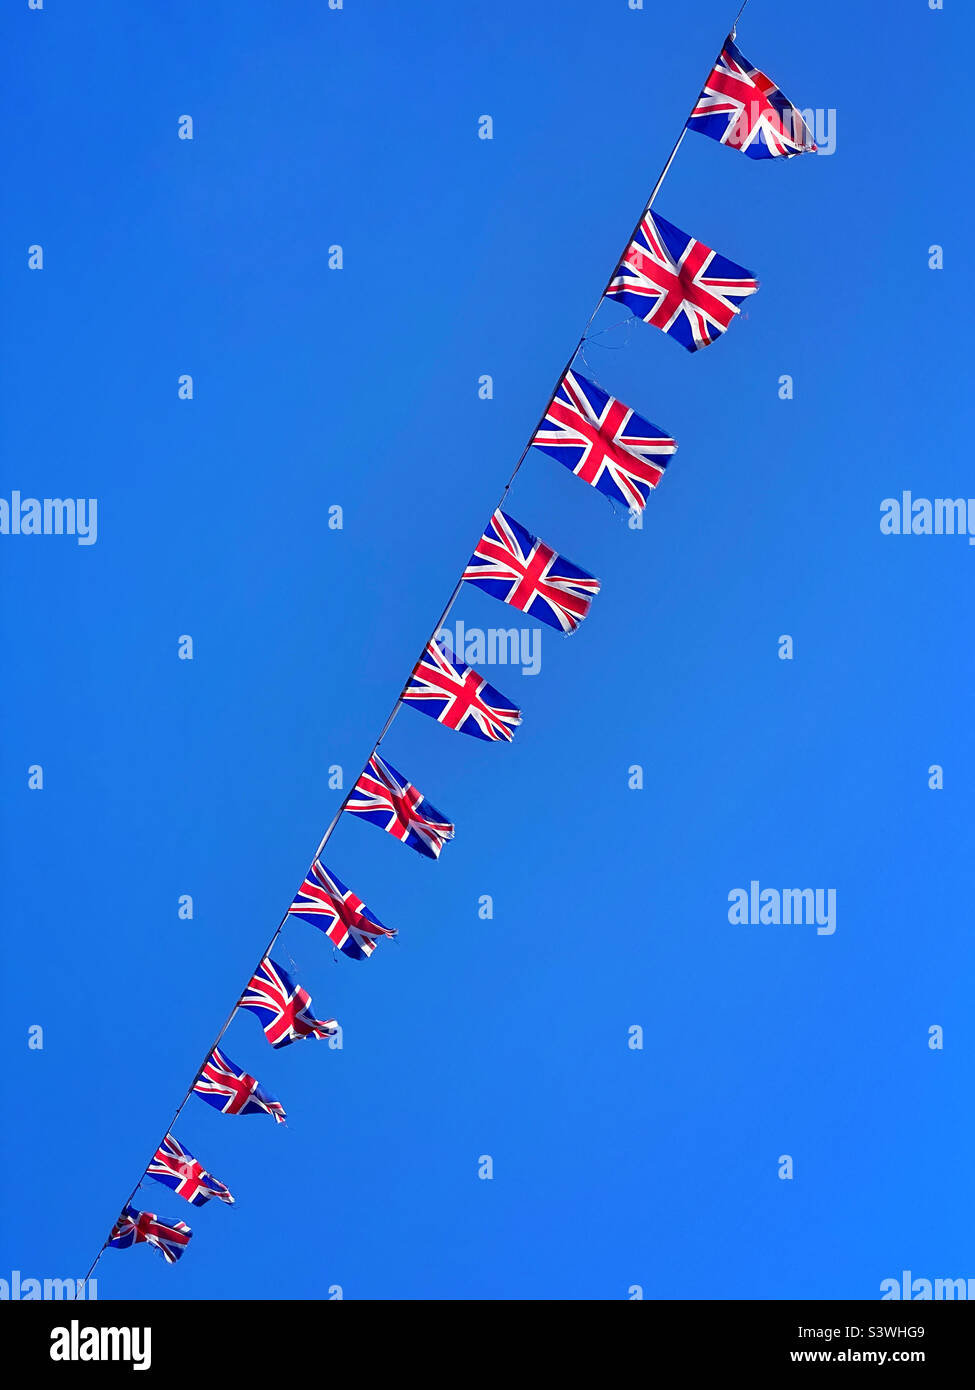 Union Jack flags flying in the sunny blue sky of a British summer. It’s the Queen’s Platinum Jubilee celebrations-a unique & historic event is celebrated. Britain at it’s best? Photo ©️ COLIN HOSKINS. Stock Photo